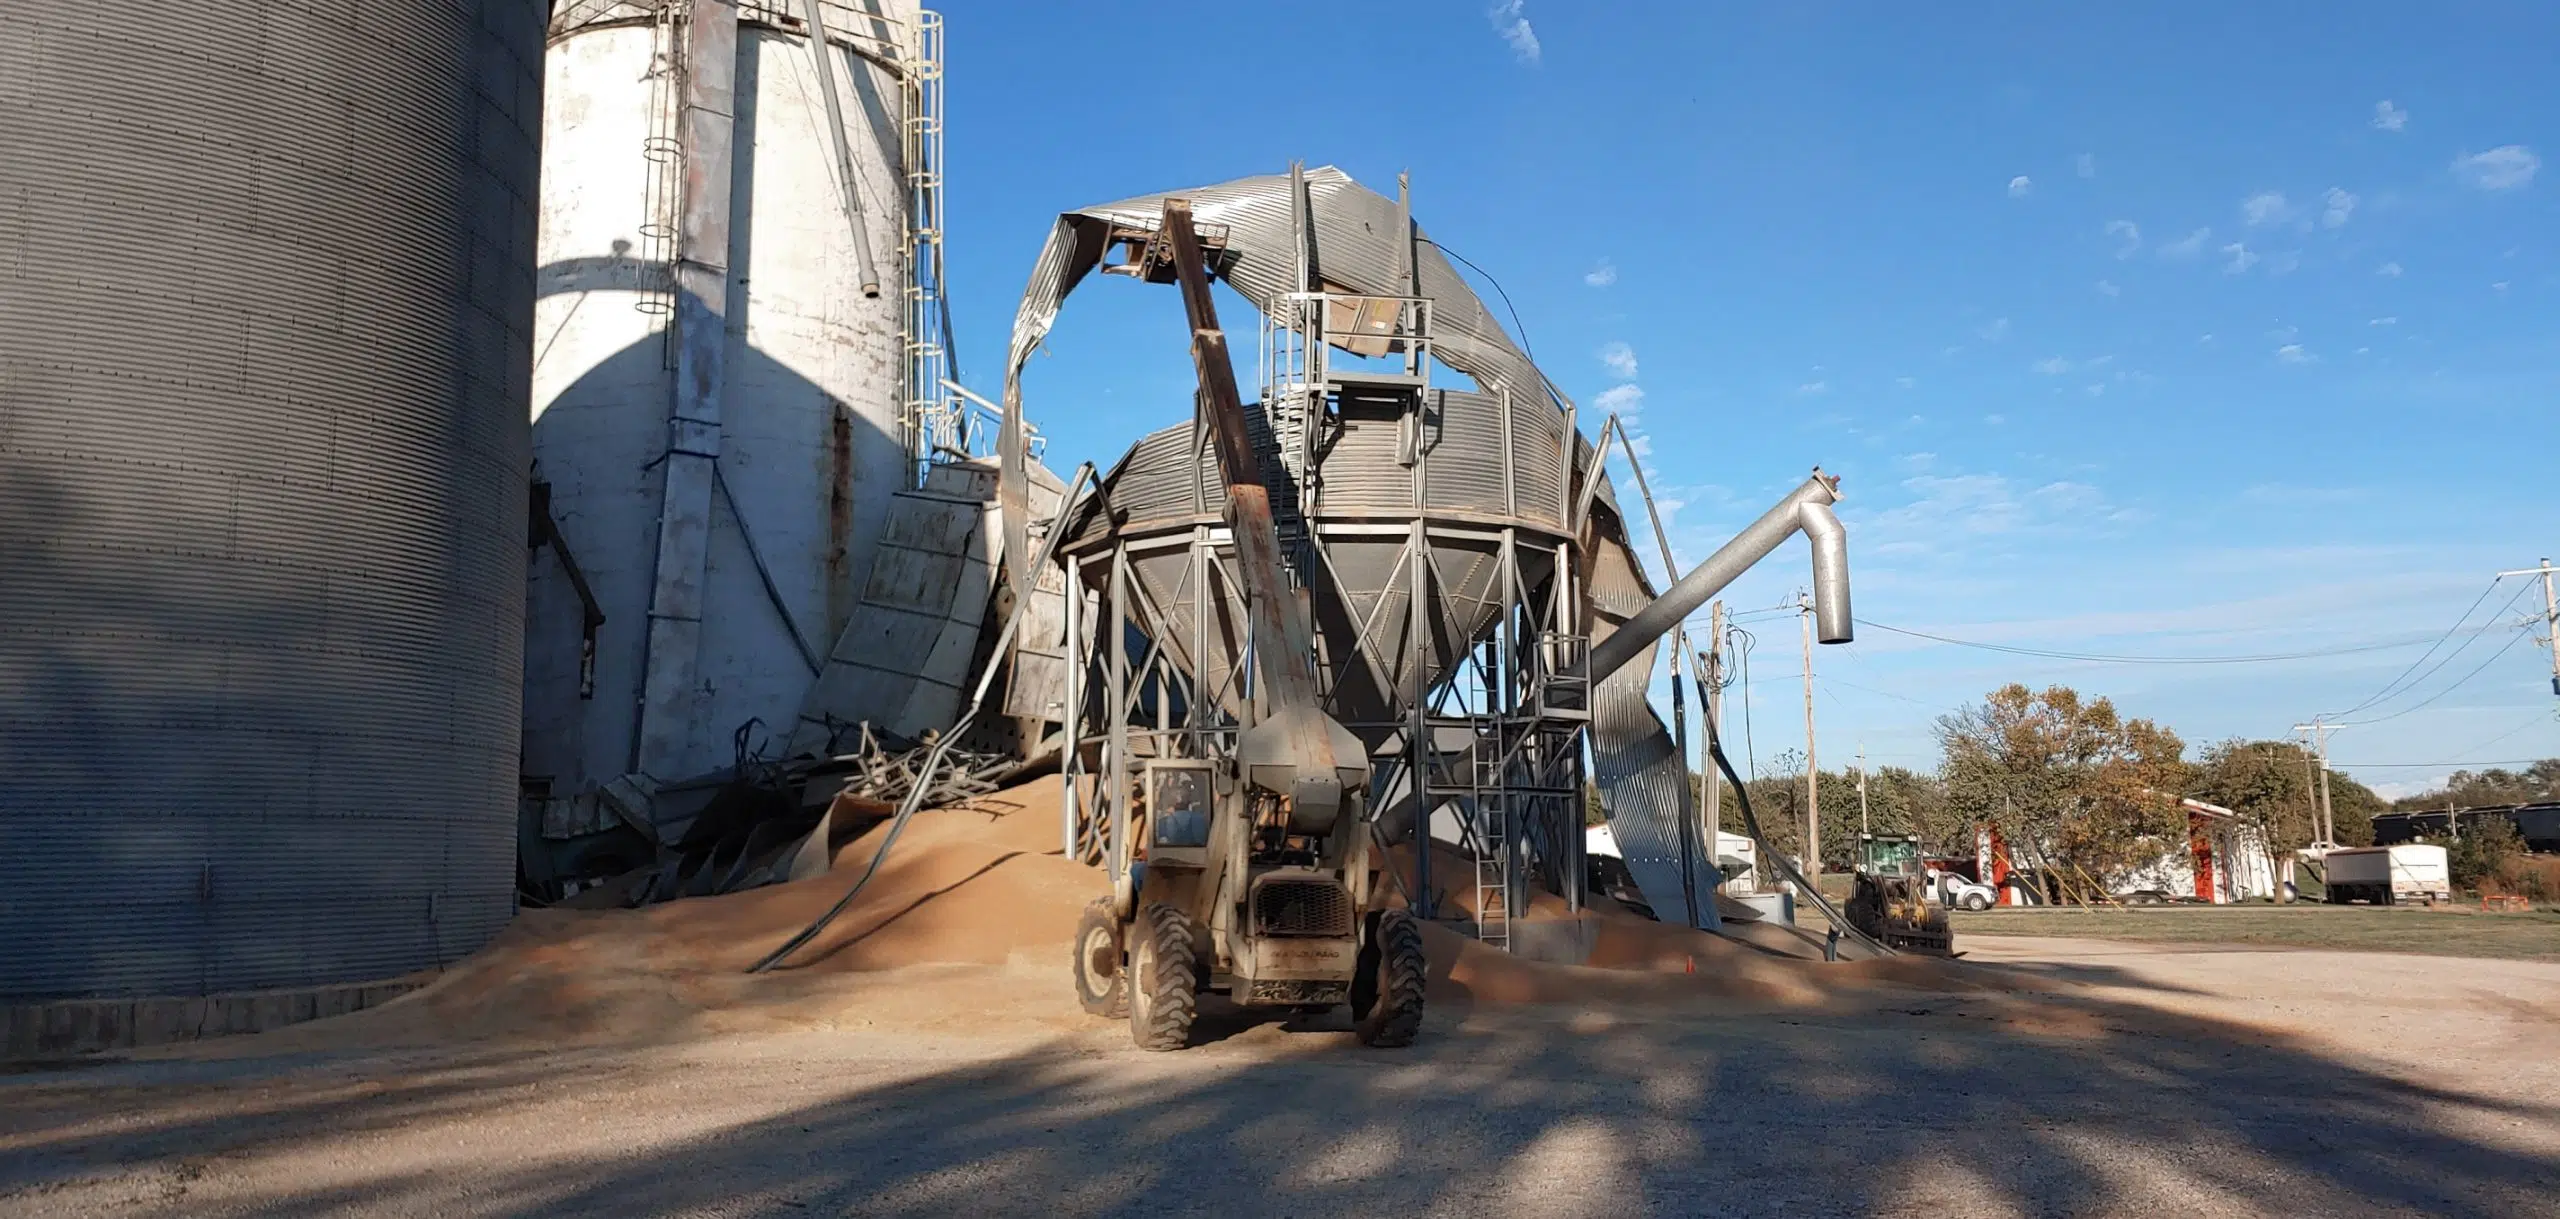 Structural issue leads to collapsed grain storage bin in Lebo Wednesday